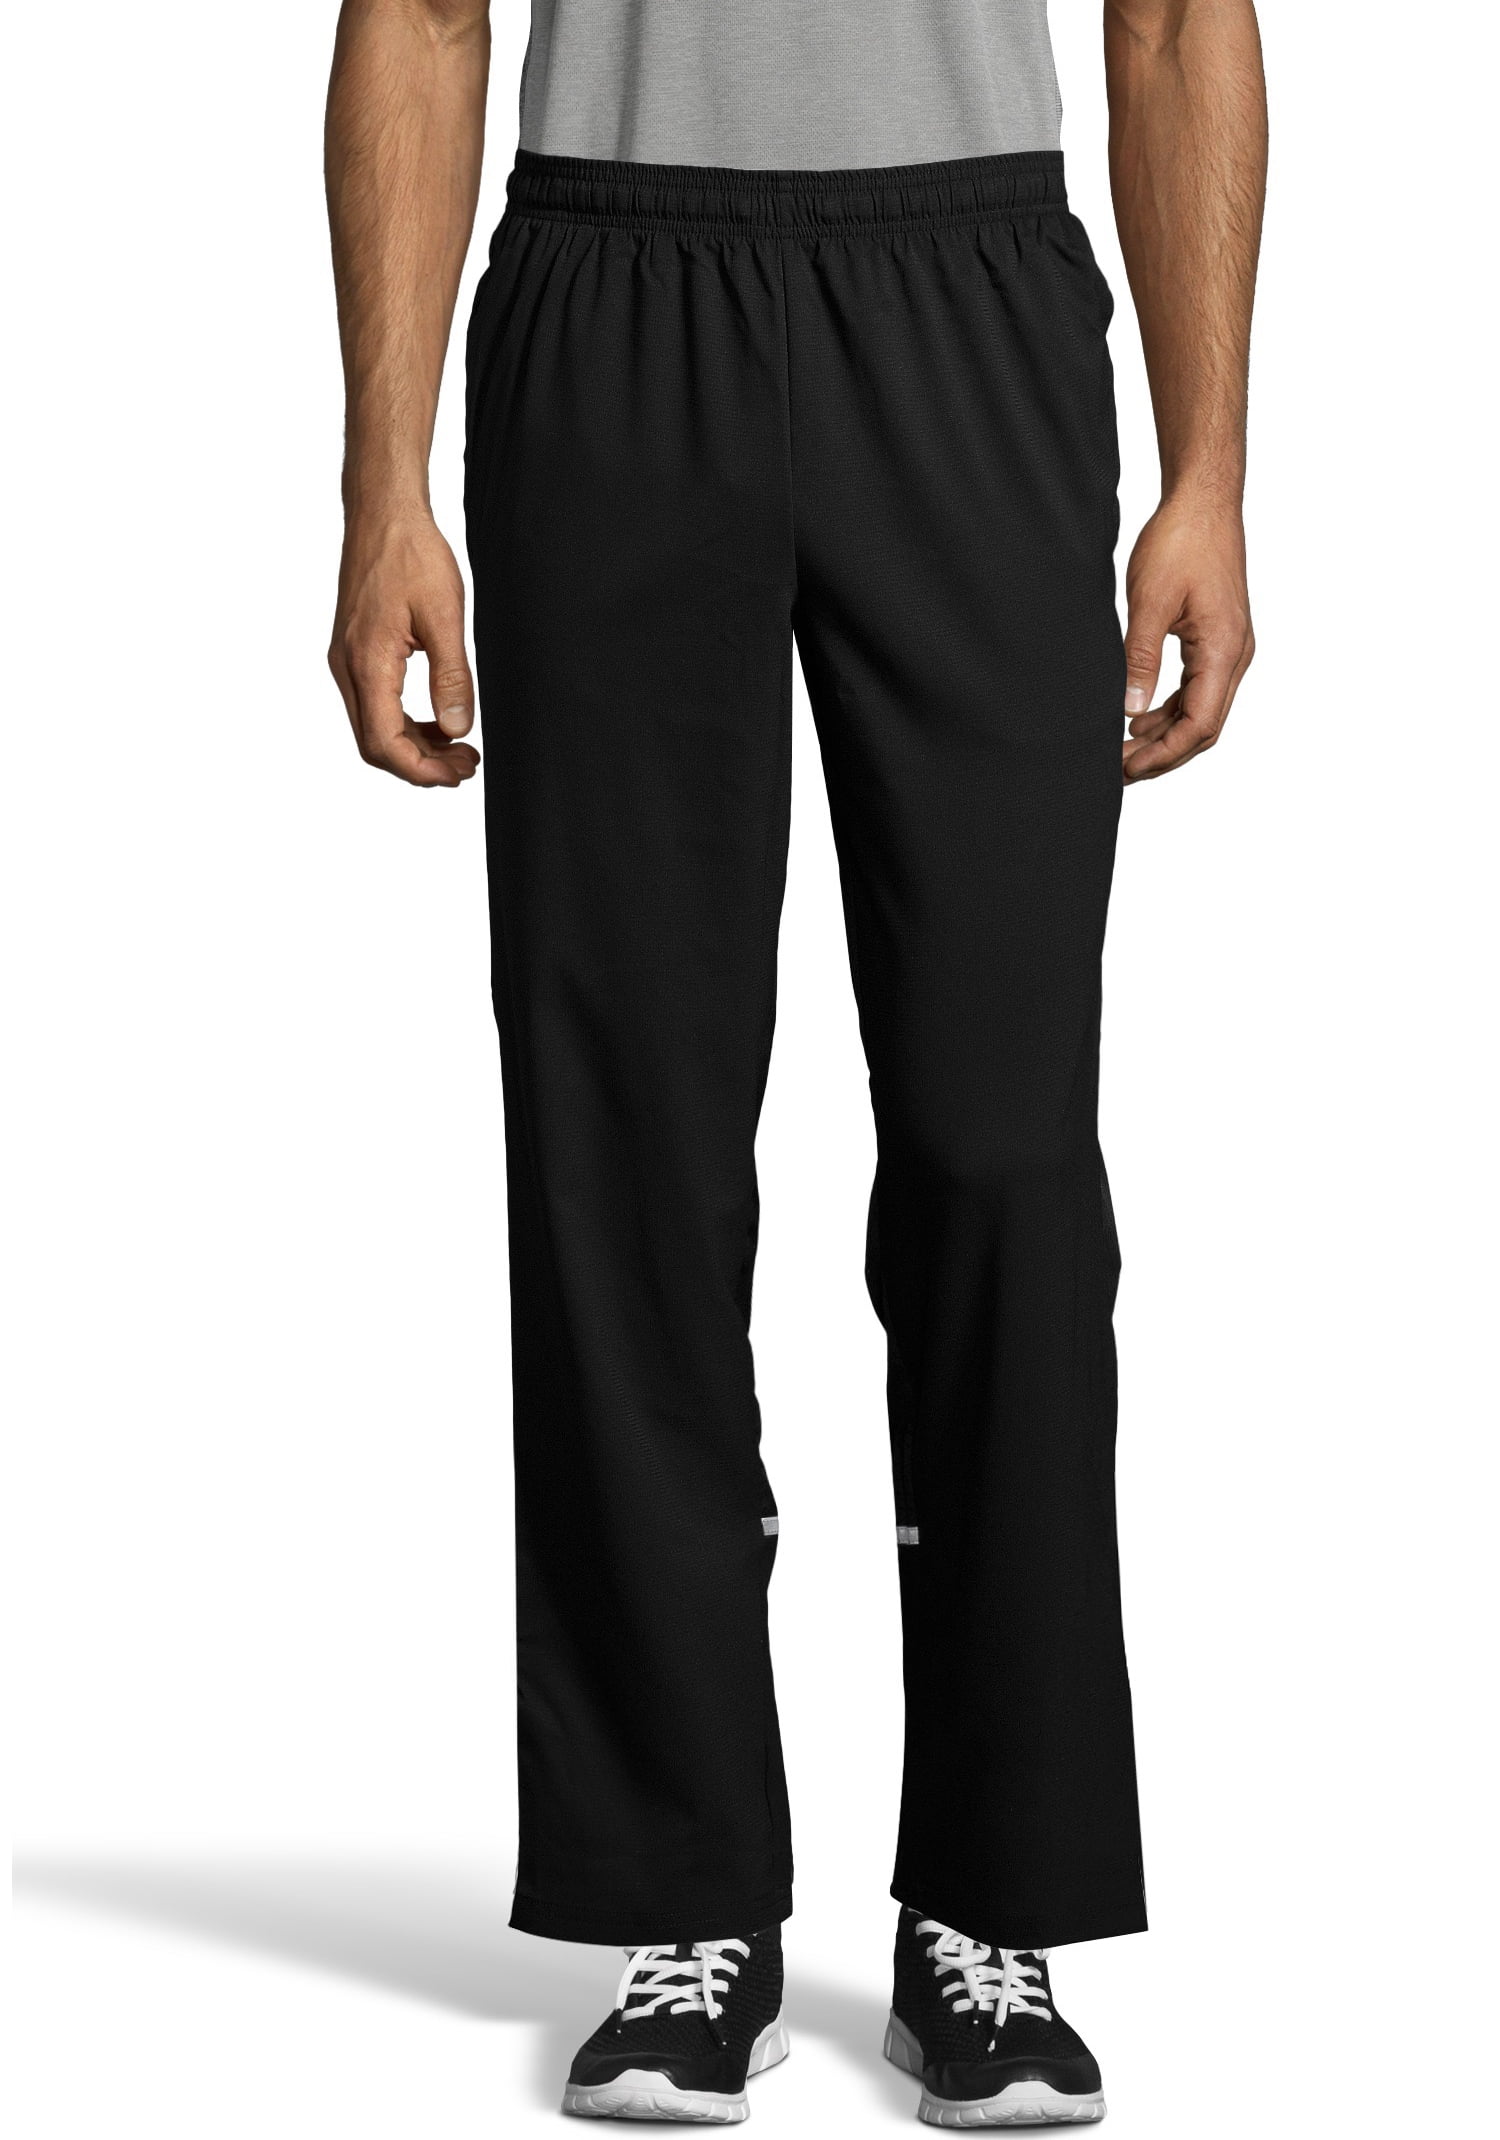 Hanes Sport Men's and Big Men's Performance Running Pants, Up to Size ...